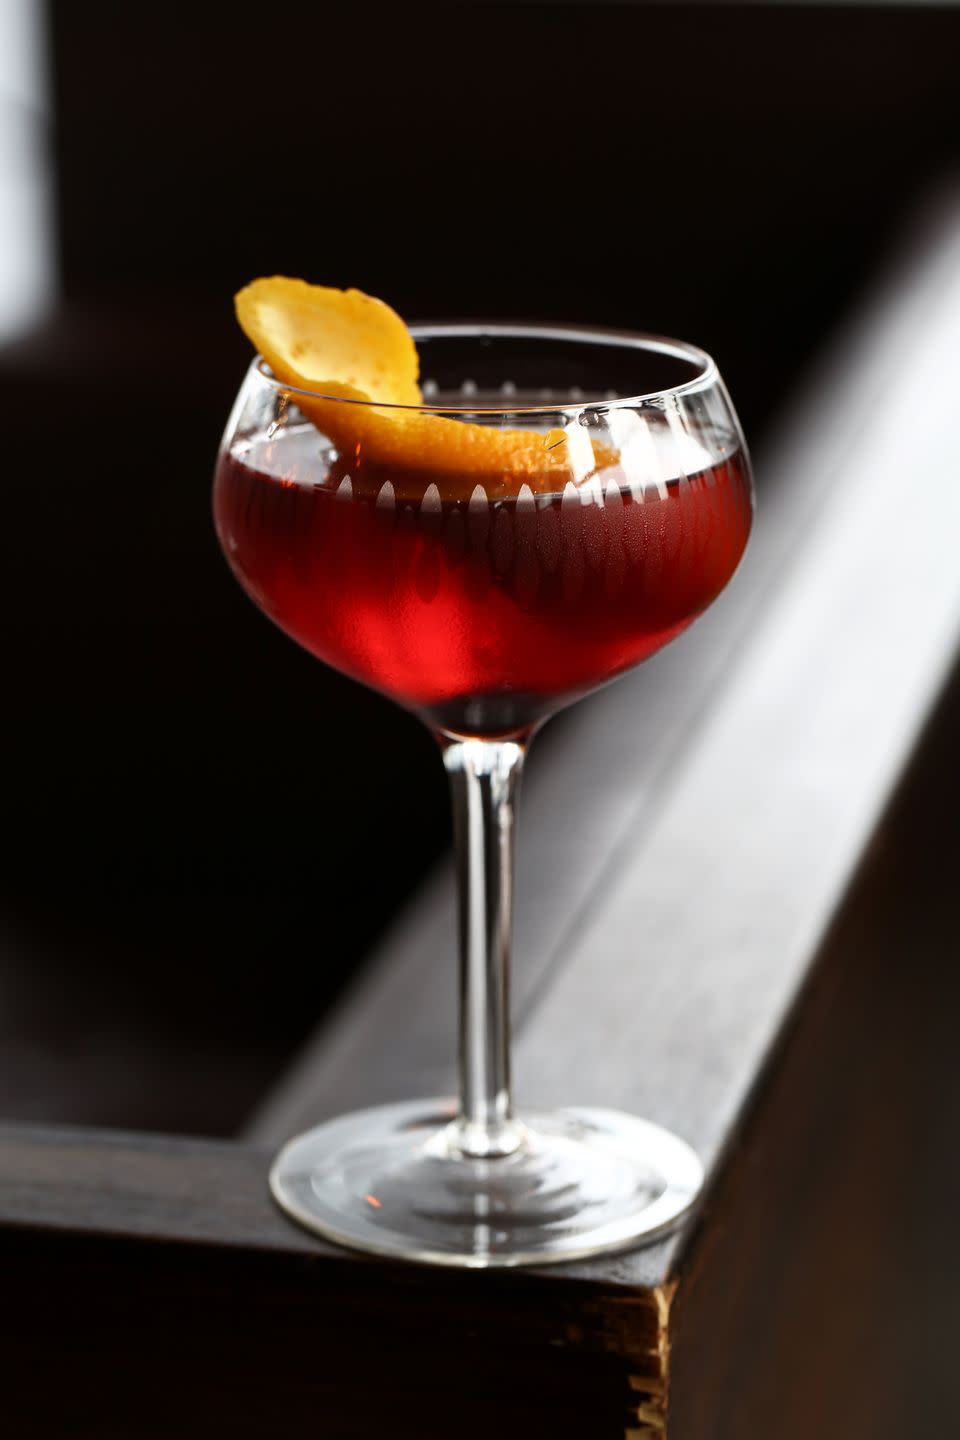 new boulevardier cocktail from pirata restaurant at 239 hennessy road in wanchai 16feb16 scmpjonathan wong